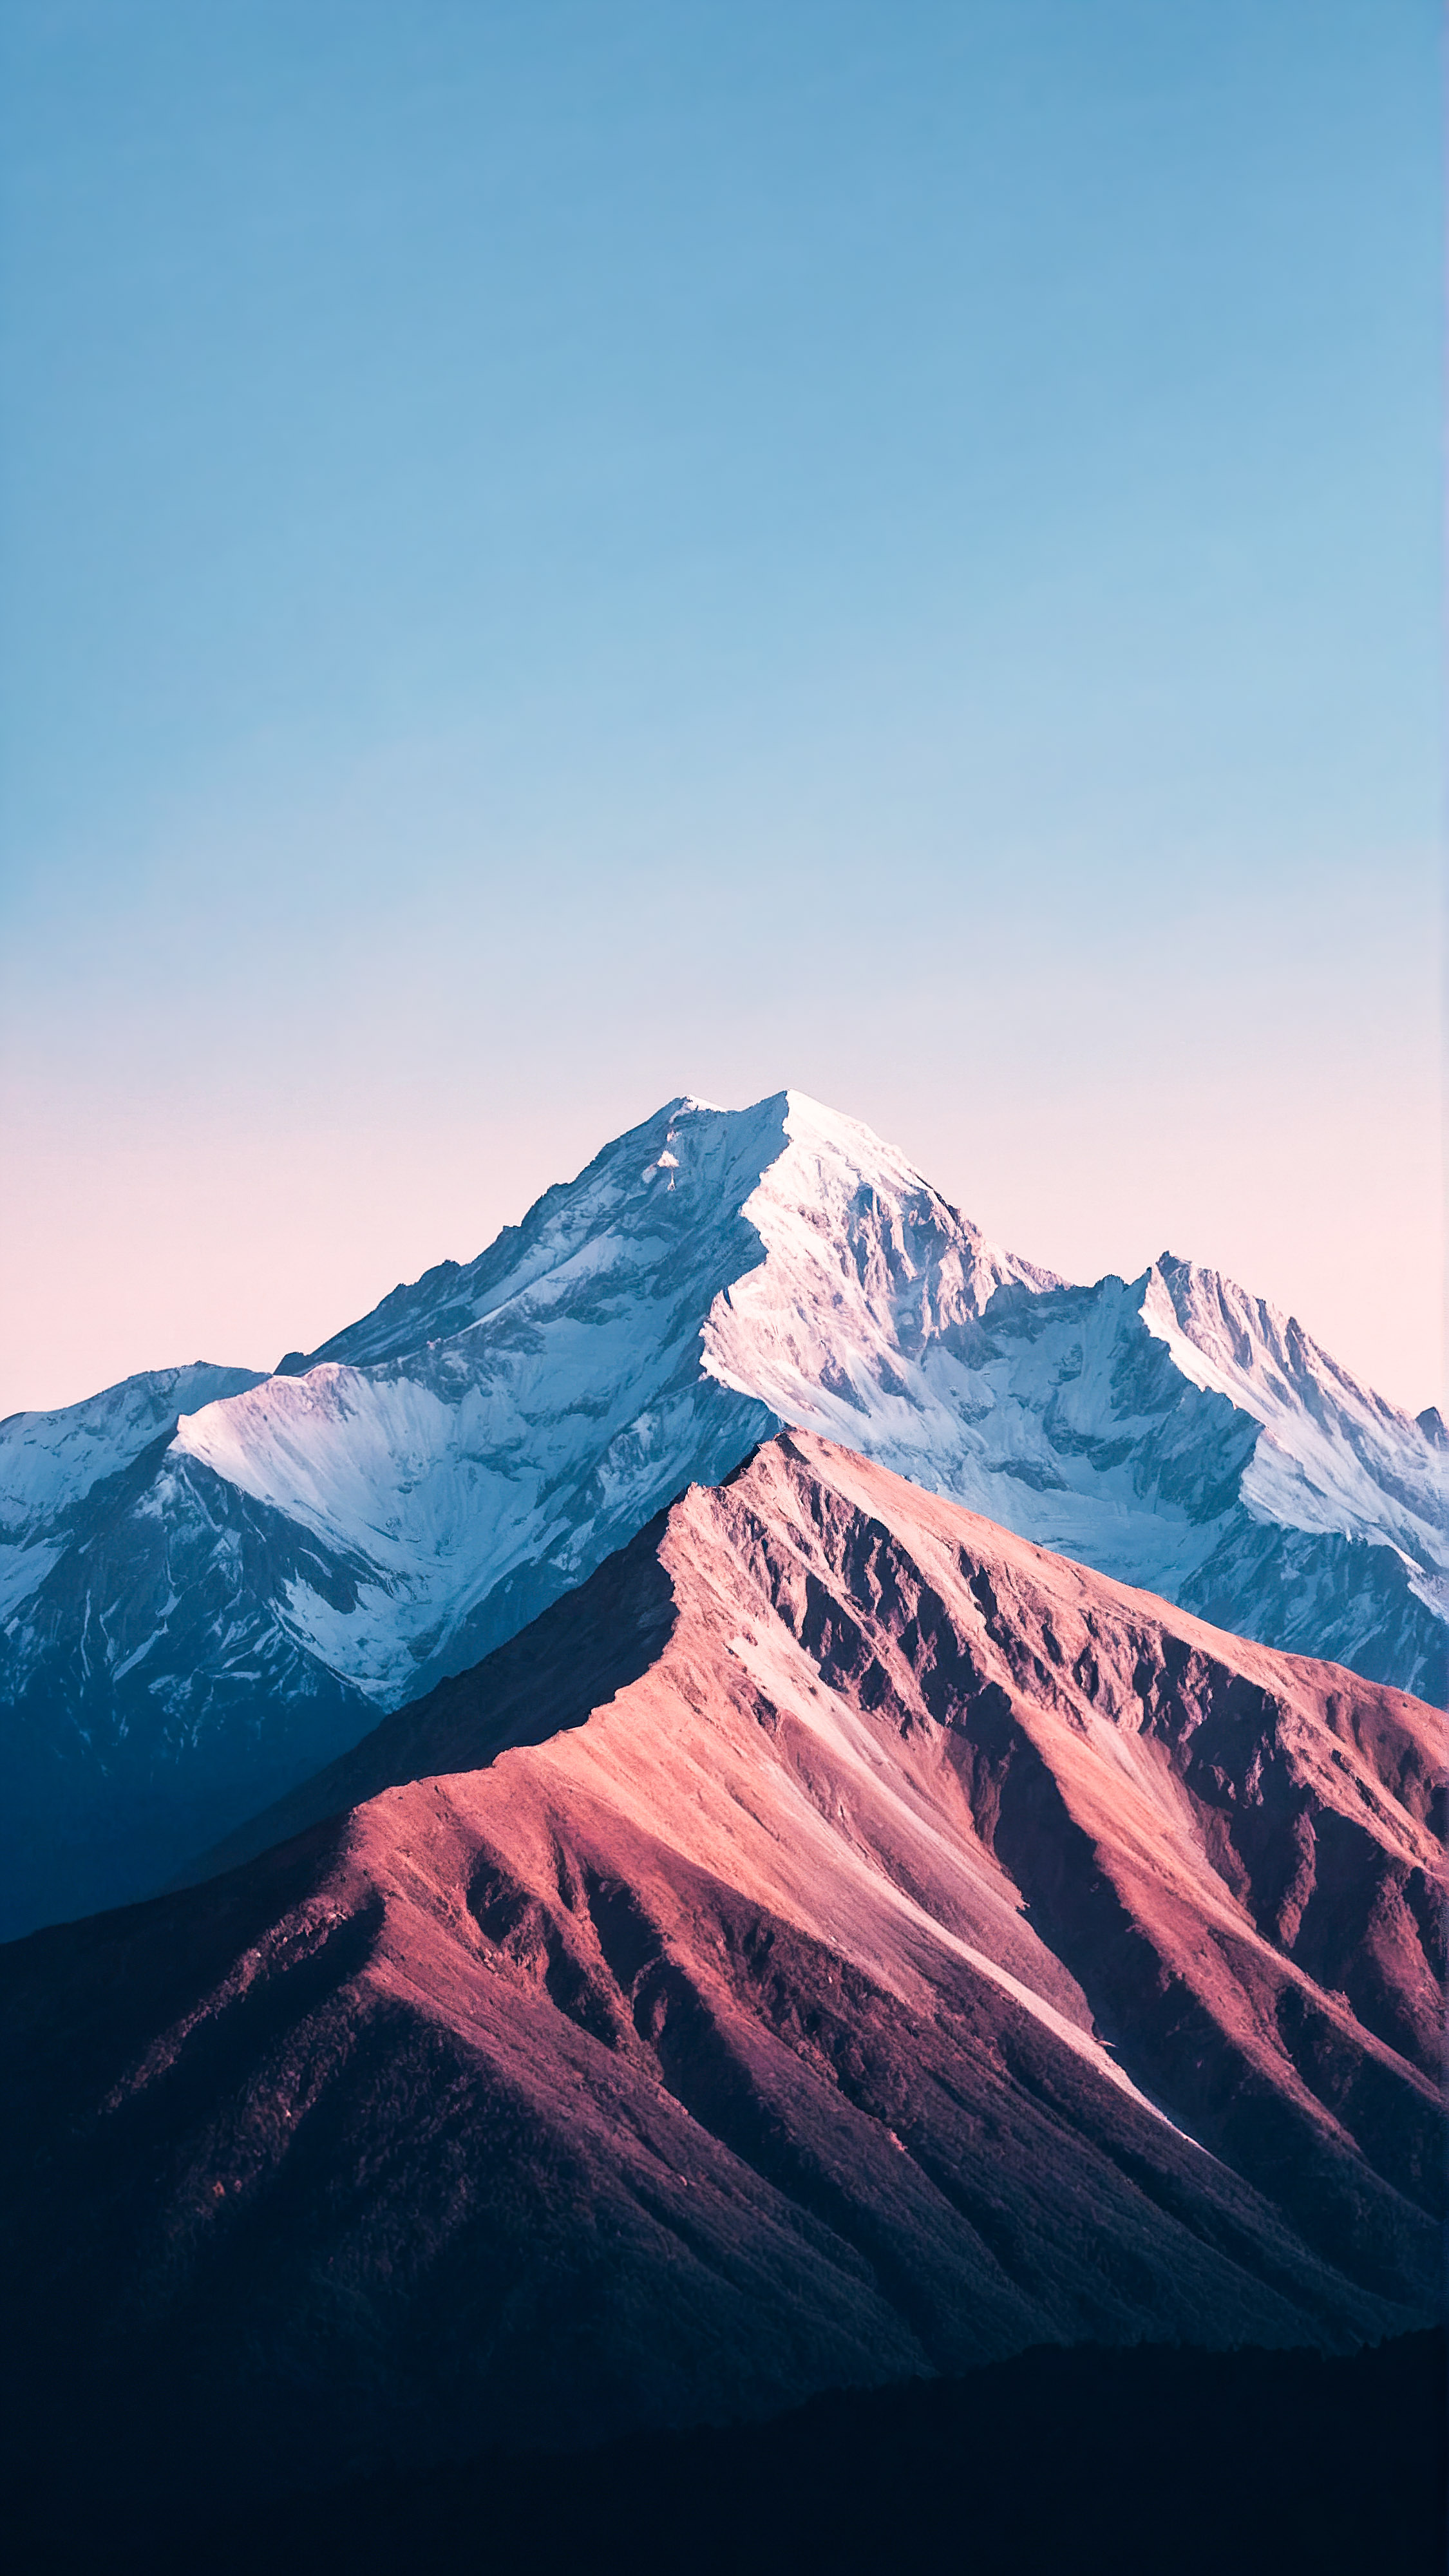 Bring the beauty of nature to your screen with our cool blue wallpaper for iPhone, a simple, clean depiction of a mountain range against a pastel-colored sky.